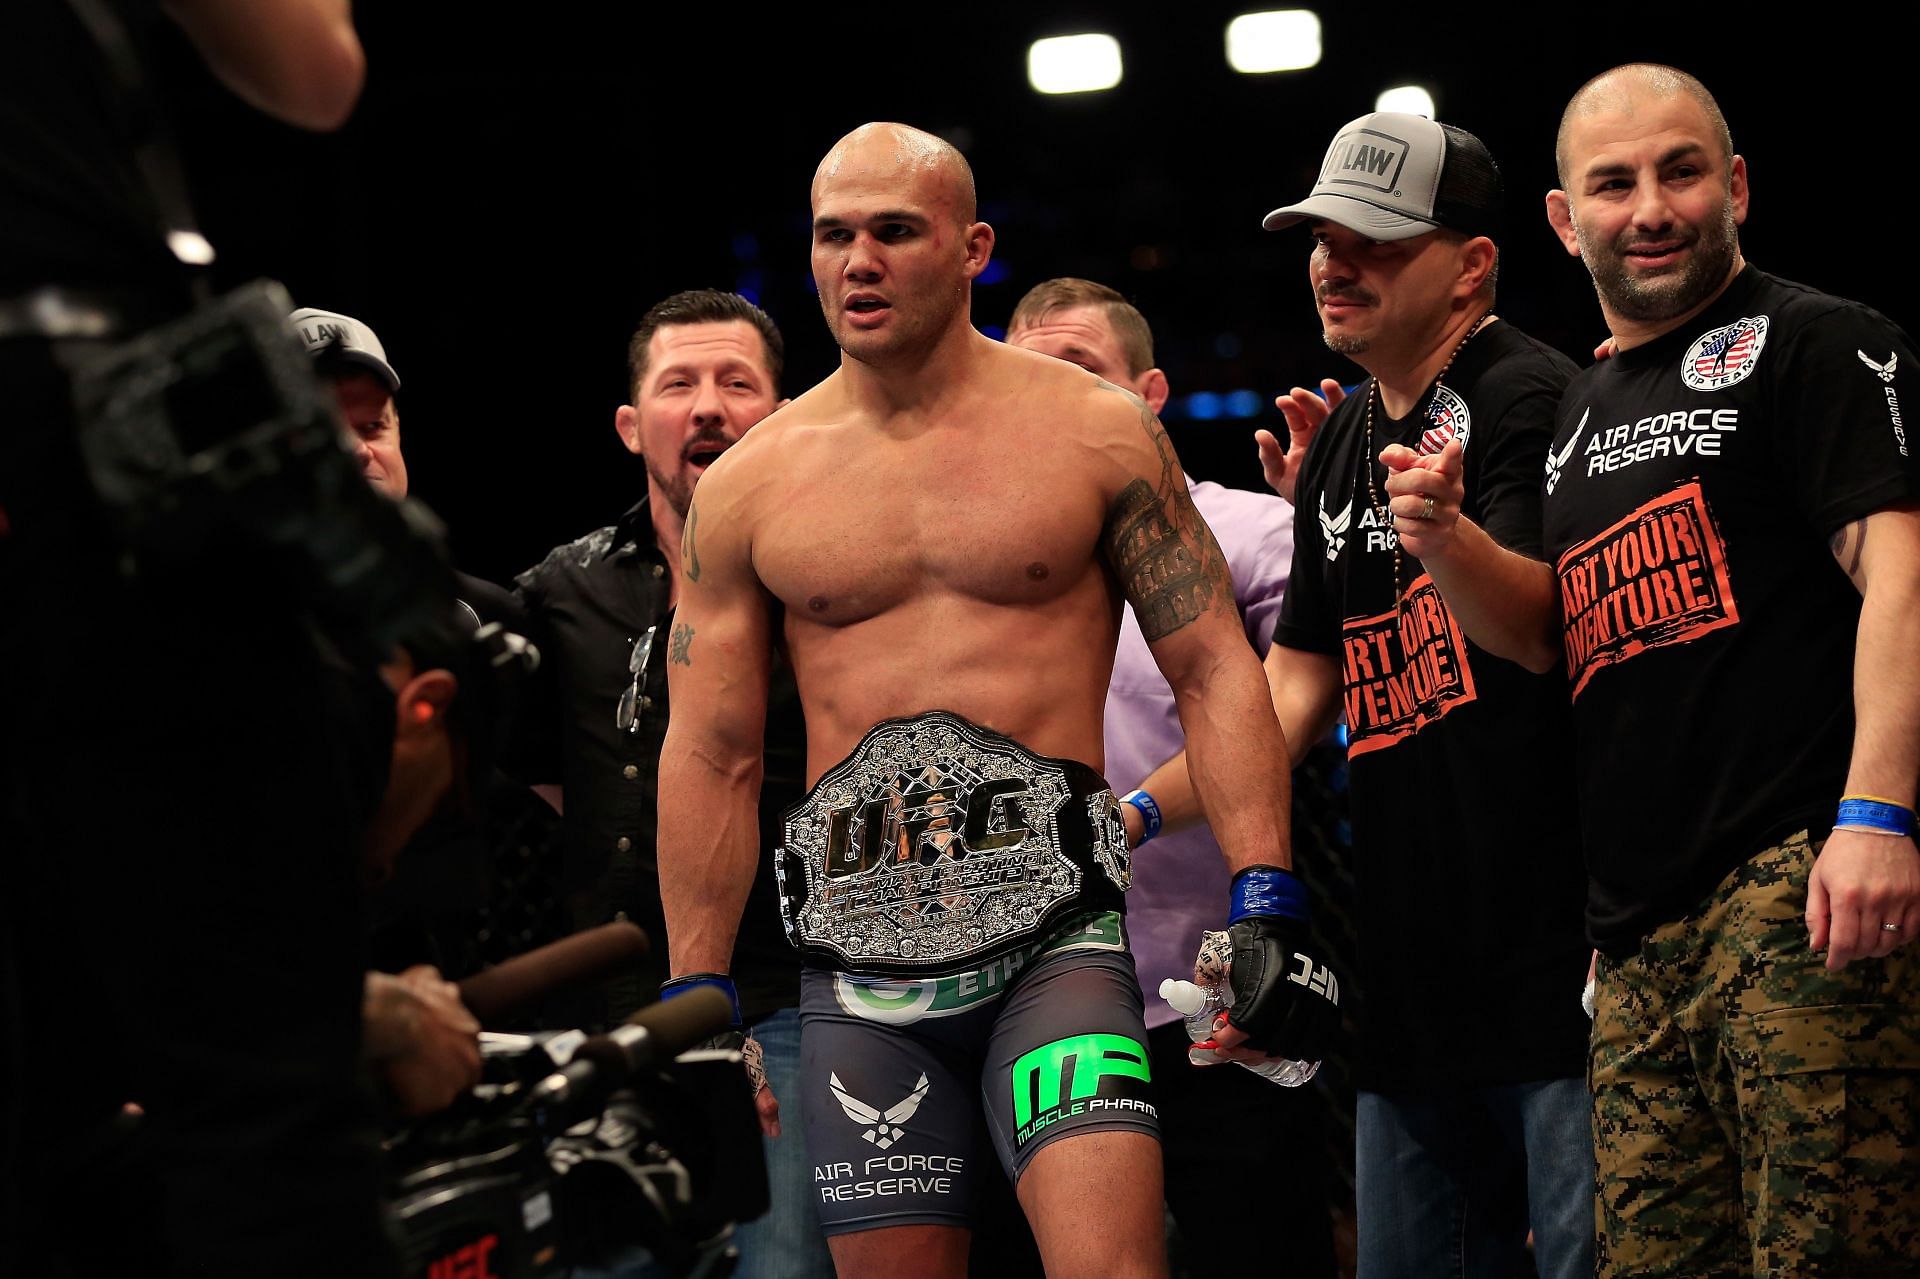 Robbie Lawler eventually won gold in the octagon, over ten years after he debuted there